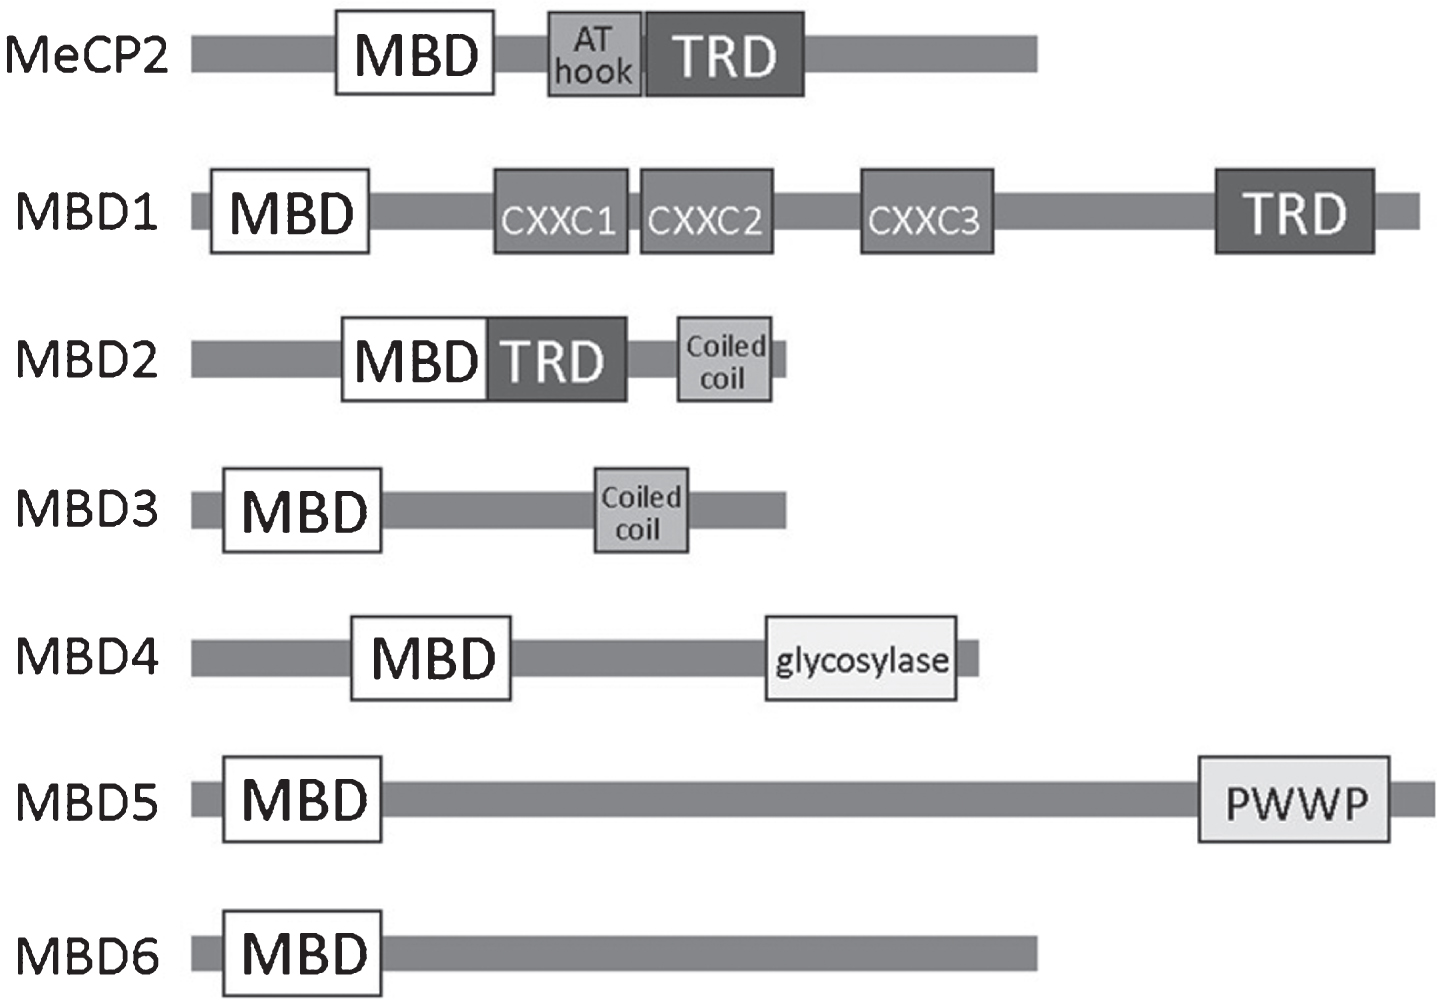 A schematic overview of the MBD family of methyl binding proteins (MBPs) including known protein domains in (MBD, methyl-CpG binding domain; TRD, transcriptional repression domain; AT hook; CXXC, zinc finger Cys-x-x-Cys domain; PWWP, Pro-Trp-Trp-Pro).